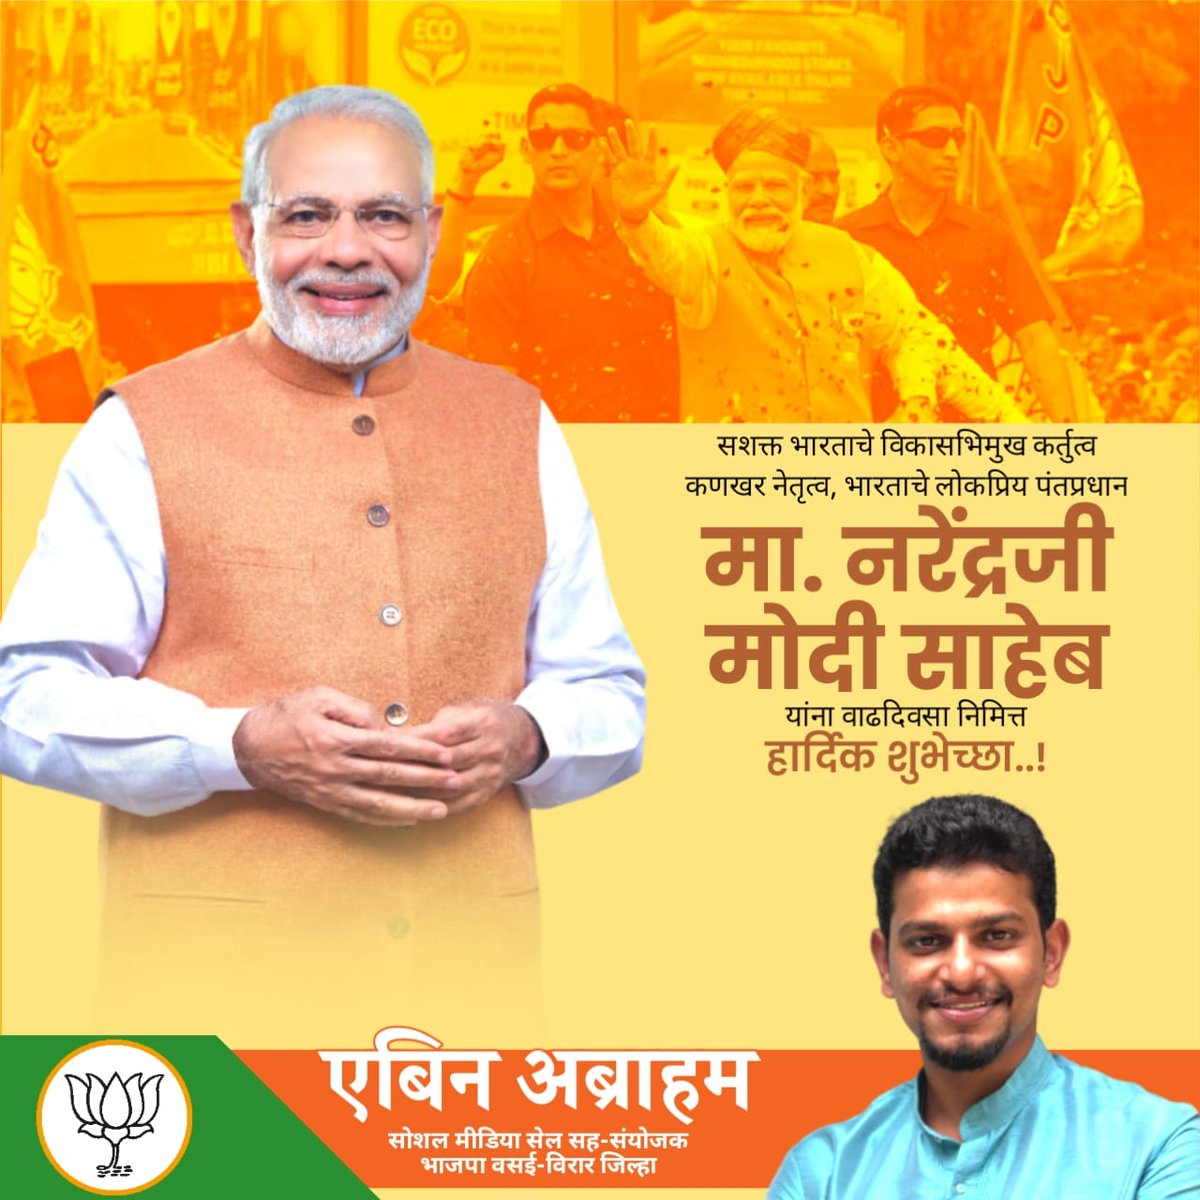 Wishing a very happy birthday to our dynamic Prime Minister, Shri Narendra Modi ji! 🎂🇮🇳 Your visionary leadership and tireless dedication to the progress of our nation continue to inspire millions. May you have a healthy and successful year ahead! 🙏🌟
#HappyBirthdayPMModi